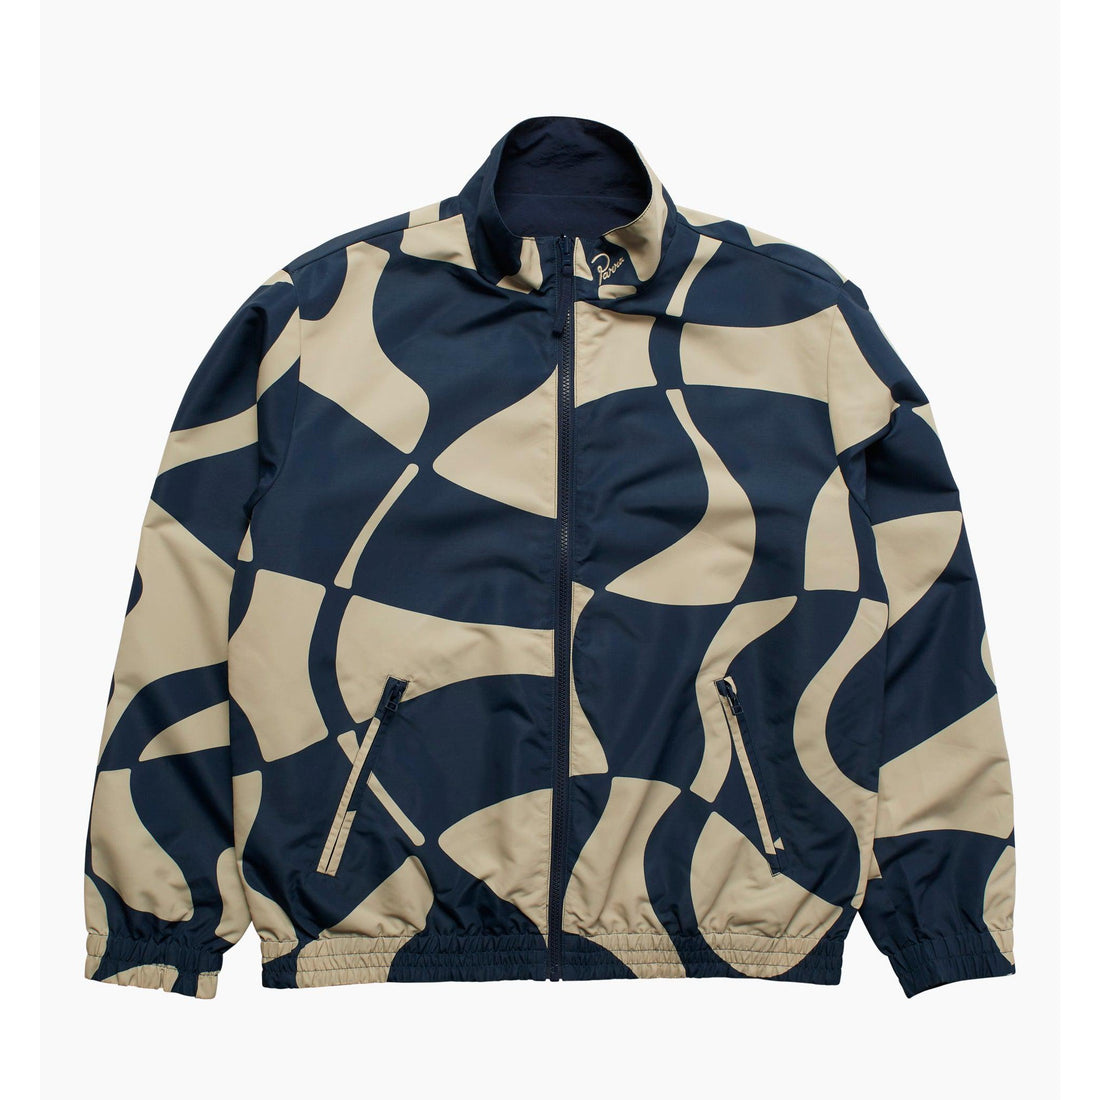 BY PARRA - ZOOM WINDS REVERSIBLE TRACK JACKET - NAVY BLUE